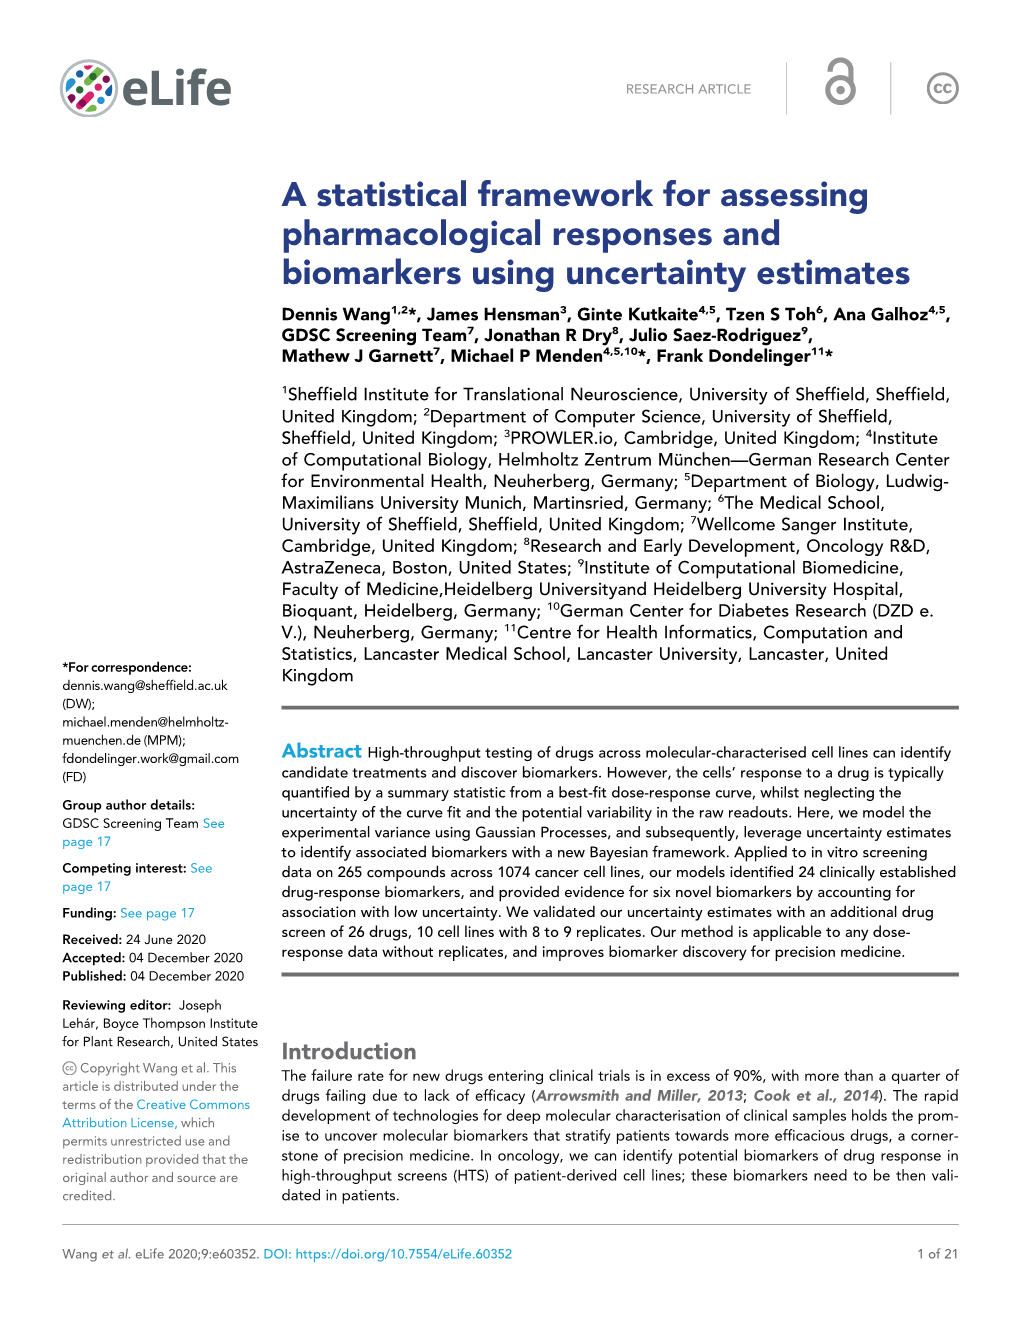 A Statistical Framework for Assessing Pharmacological Responses And